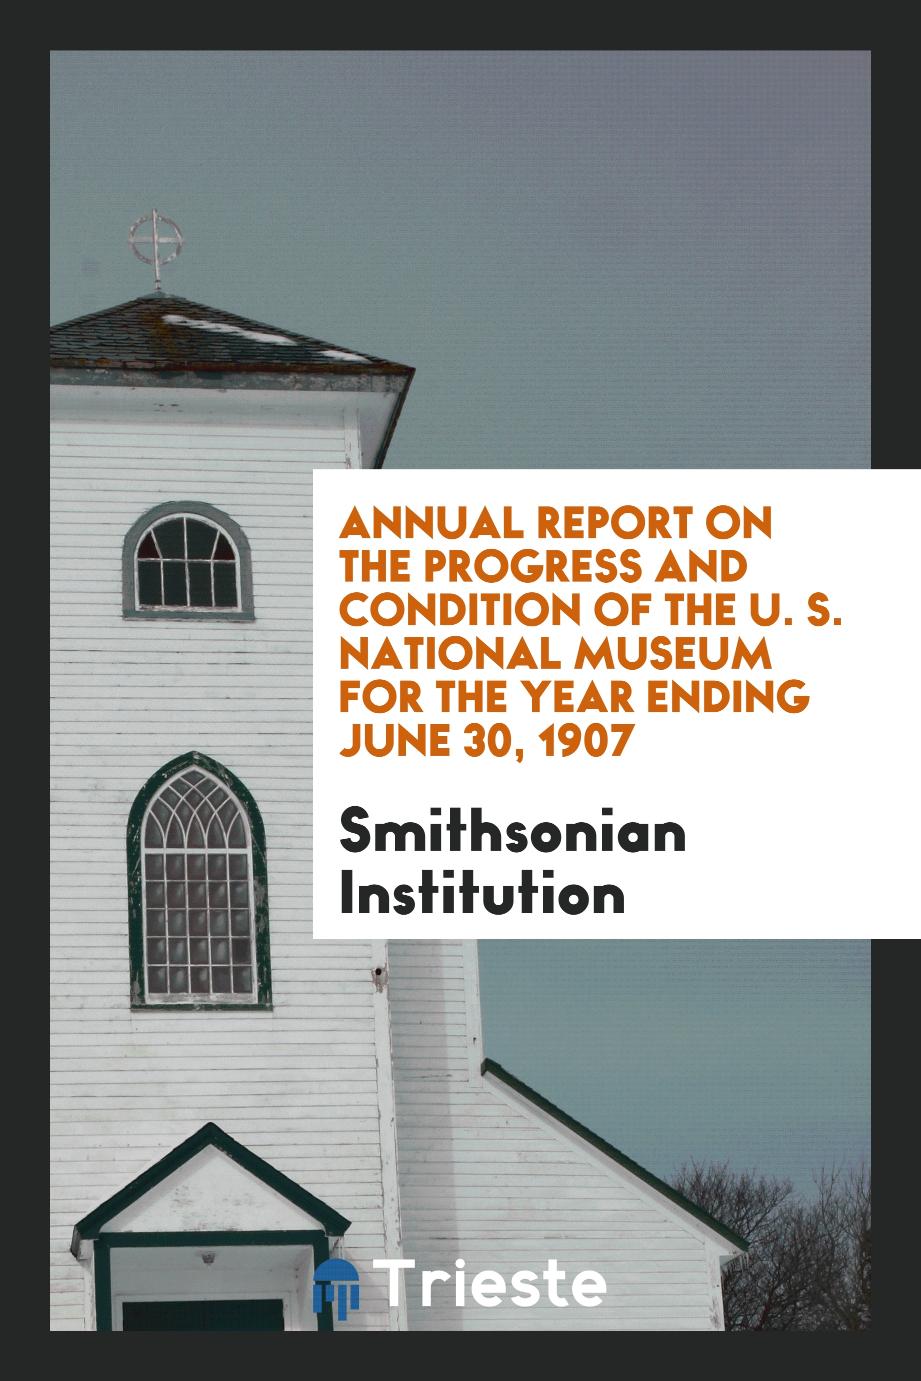 Annual Report on the Progress and Condition of the U. S. National Museum for the Year Ending June 30, 1907